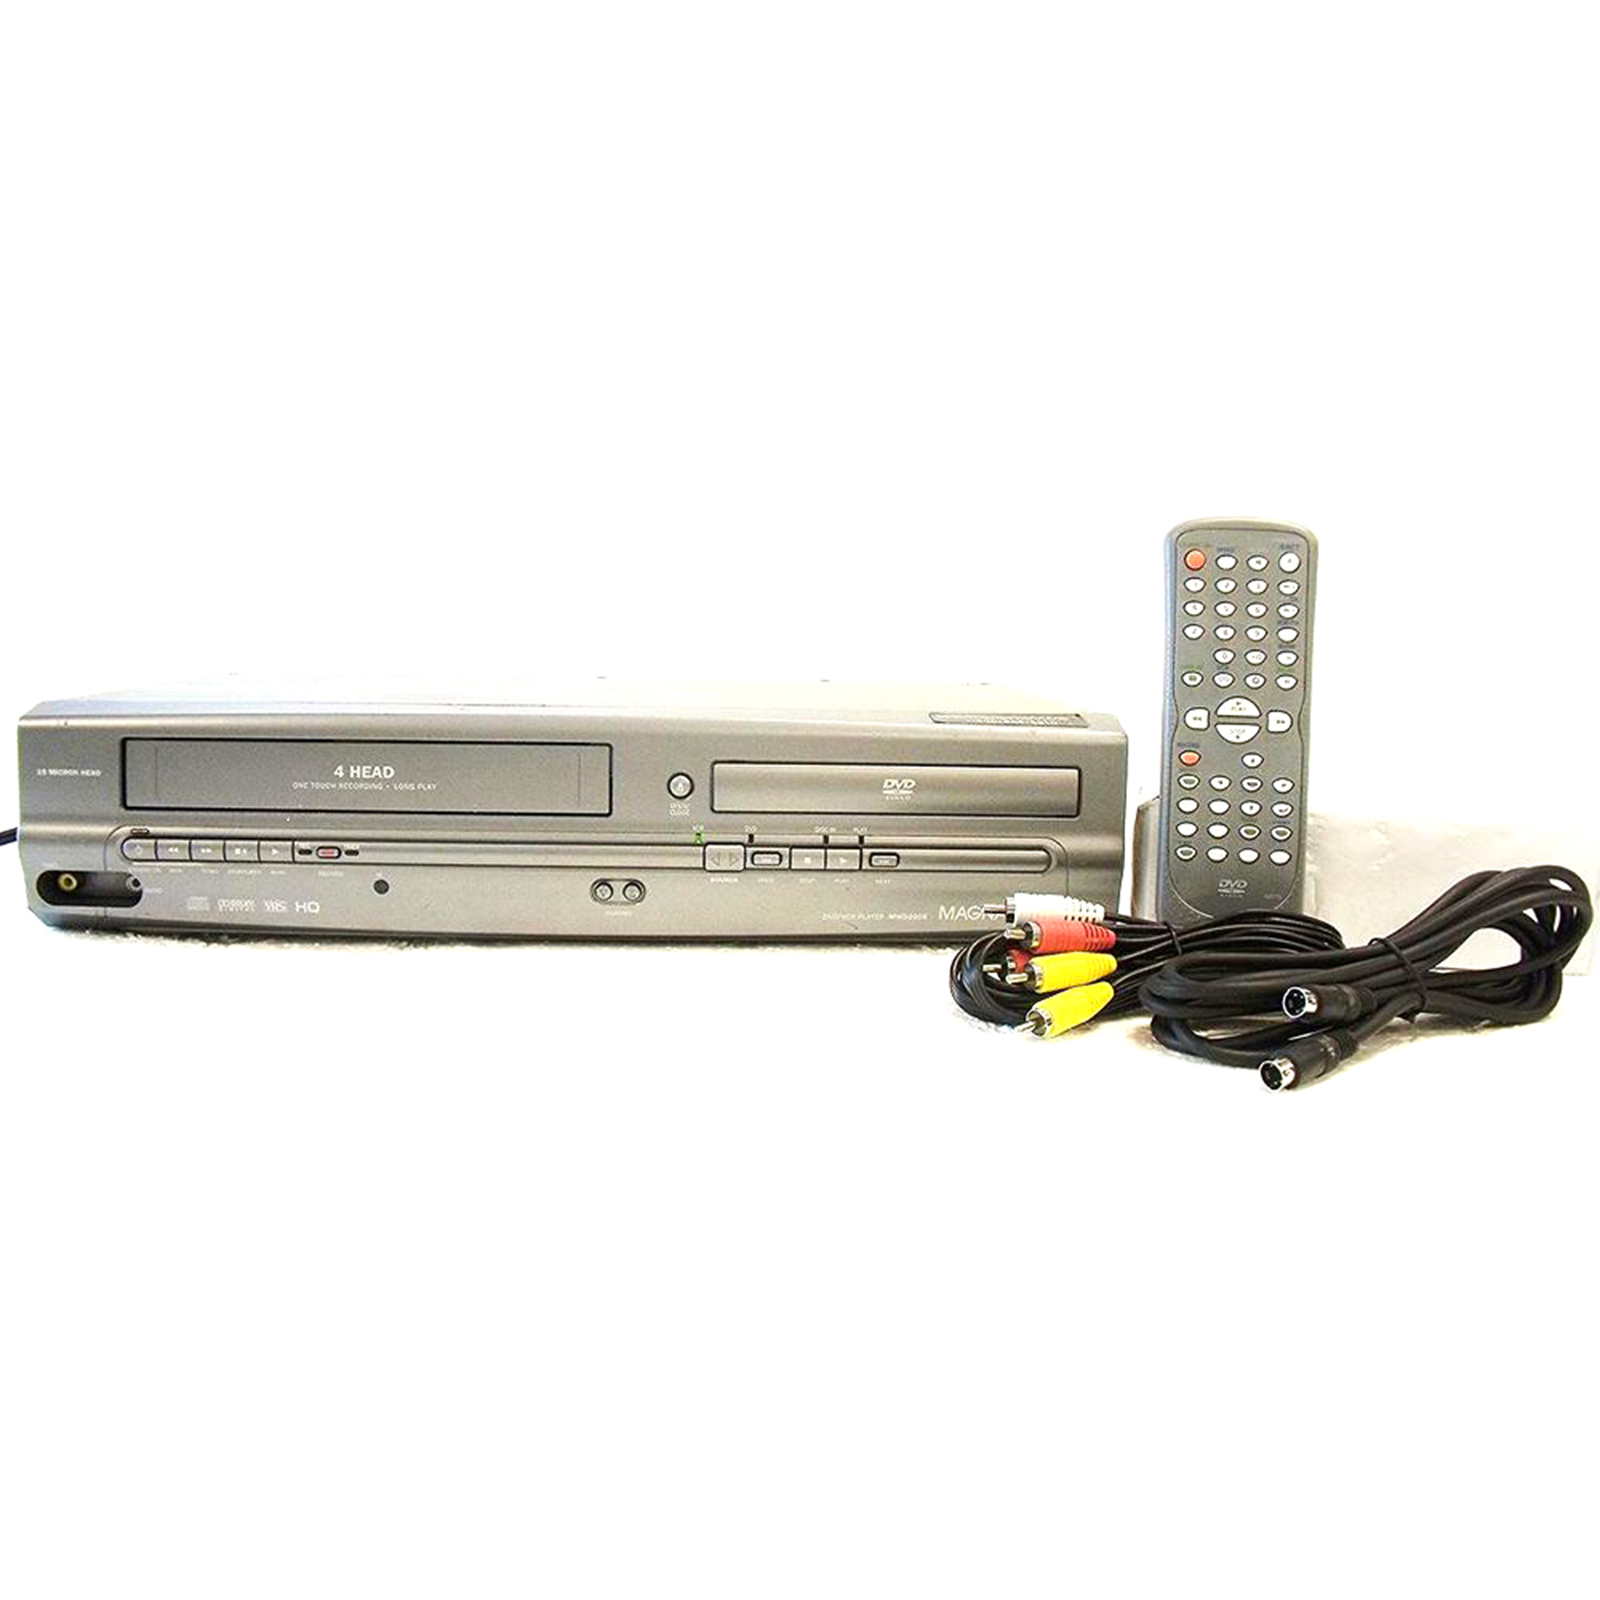 Philips NB179  MWD2205 DVD/VCR Combination Player